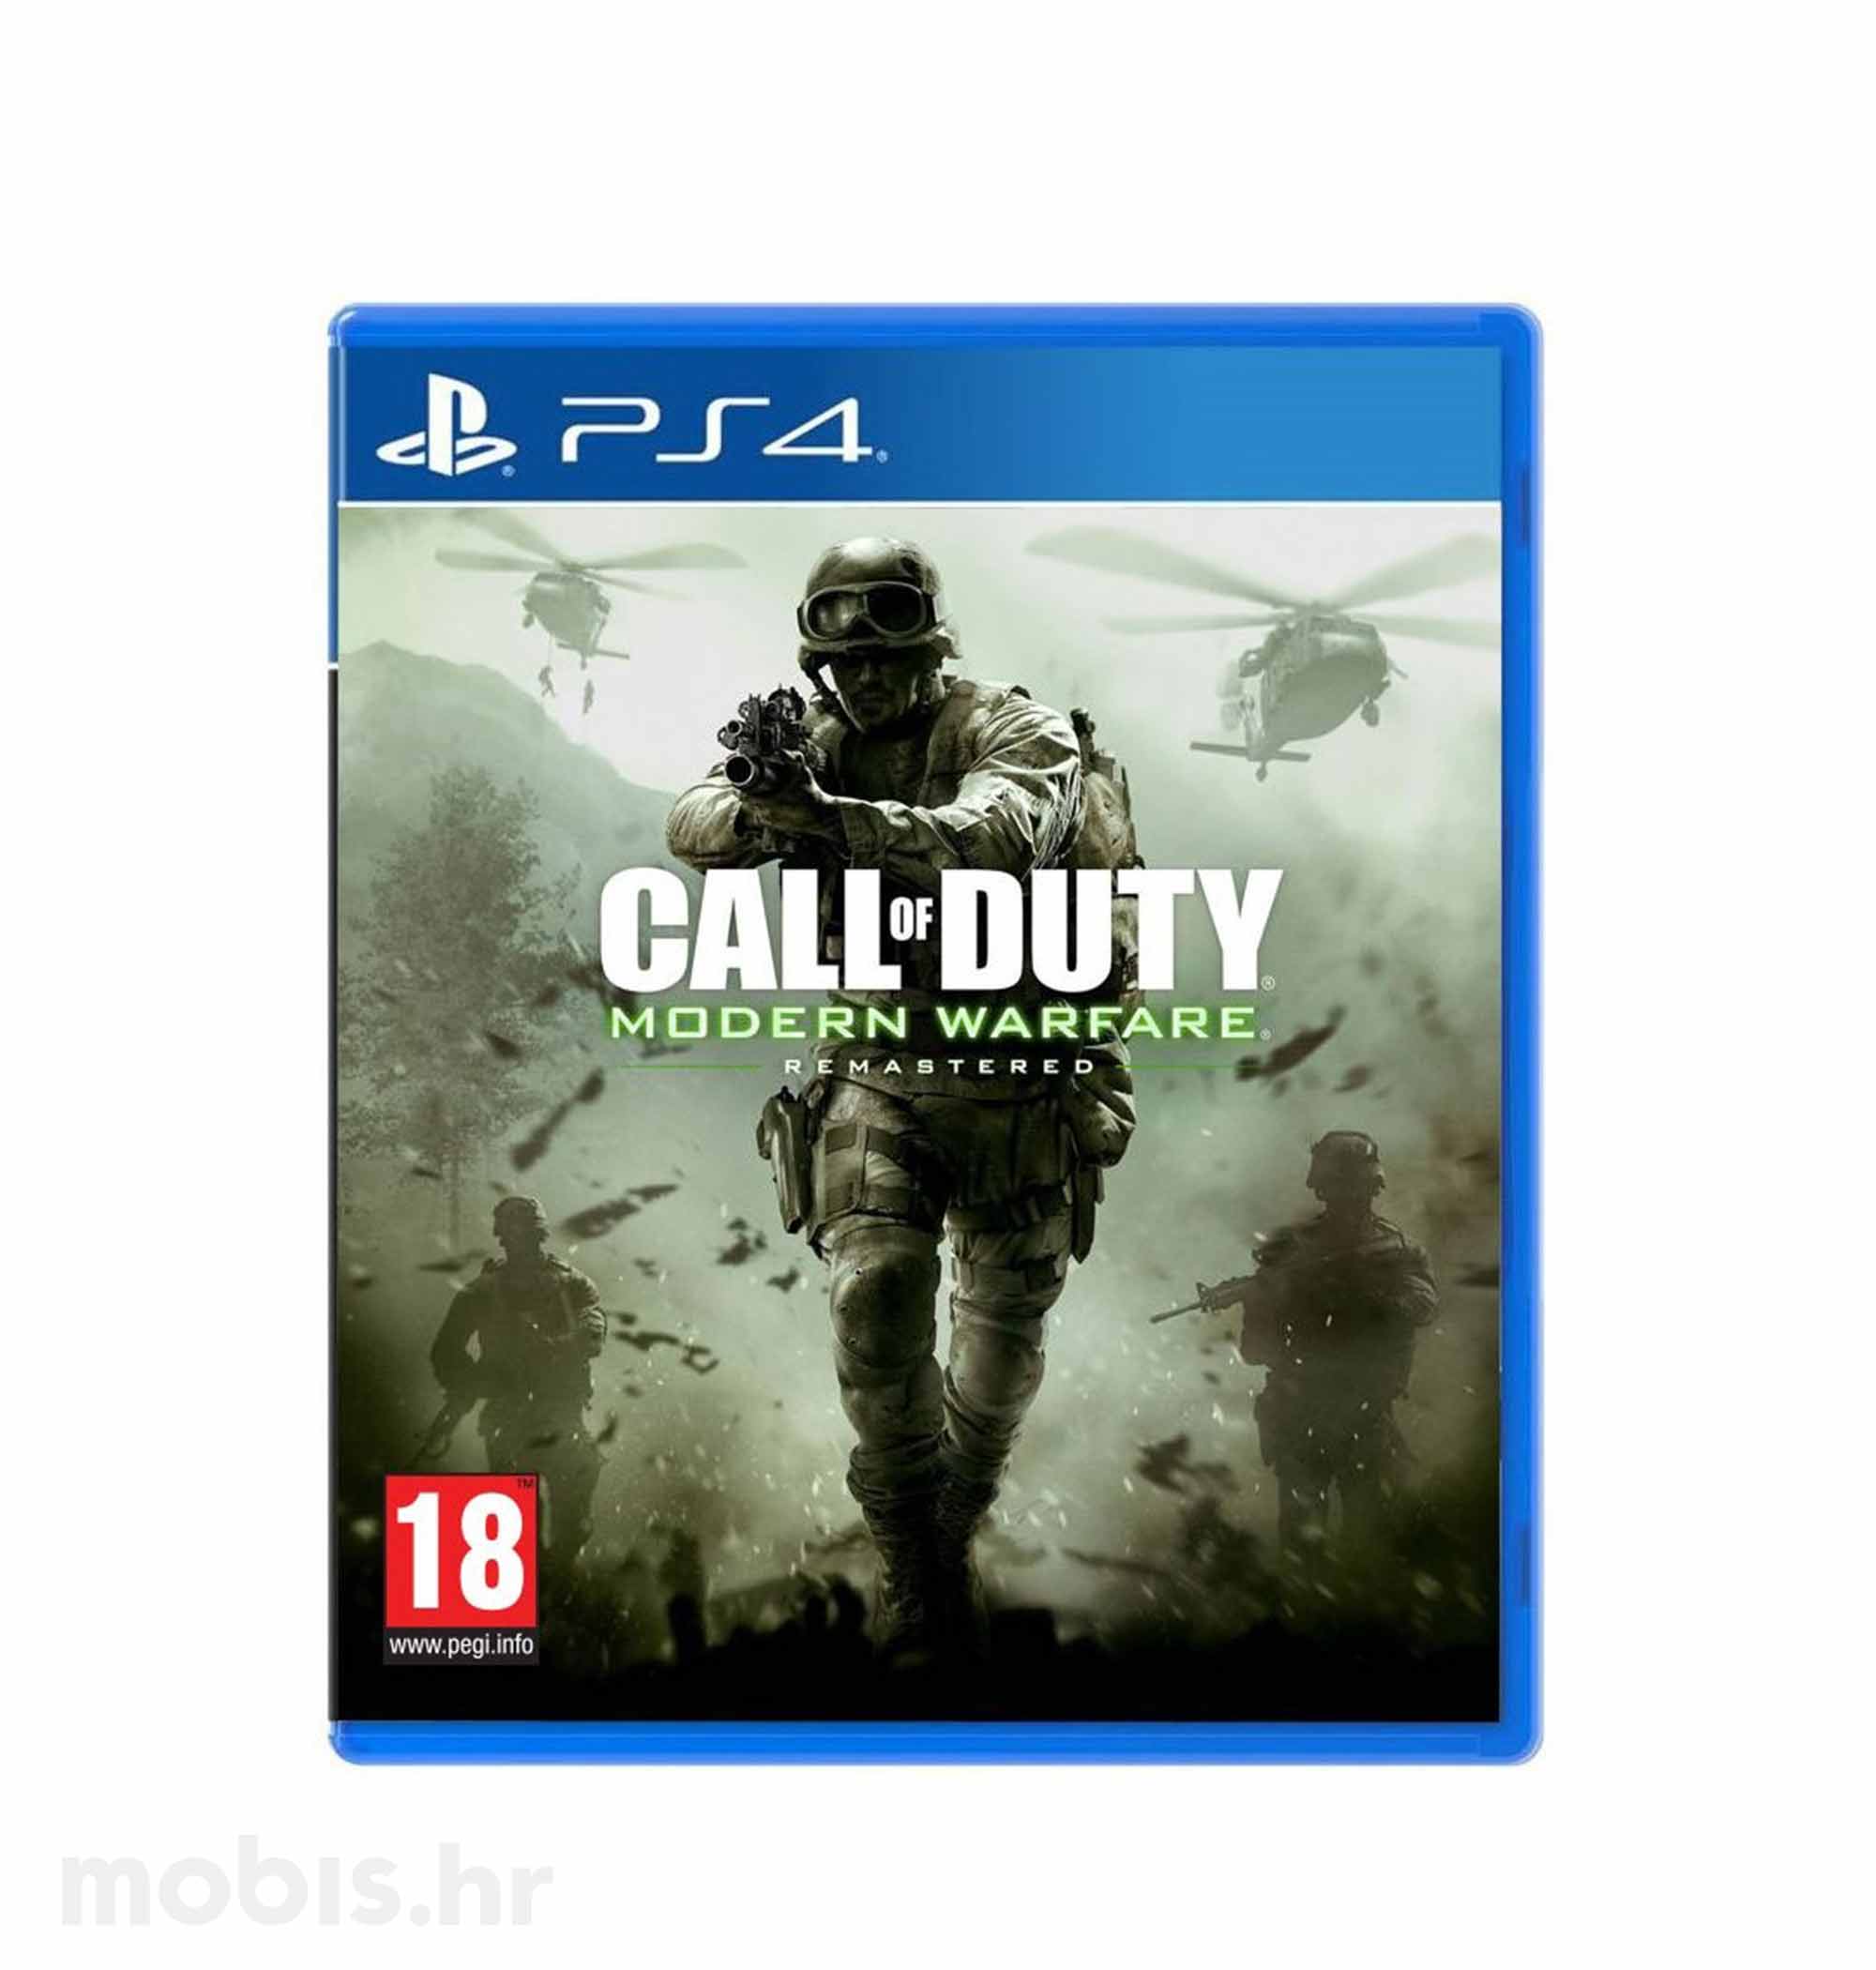 Call of duty remastered ps4. Call of Duty Modern Warfare пс4. Call of Duty MW Remastered ps4. Call of Duty 4 Modern Warfare диск пс4. Диск коробка Call of Duty Modern Warfare 2 2022 ps4.